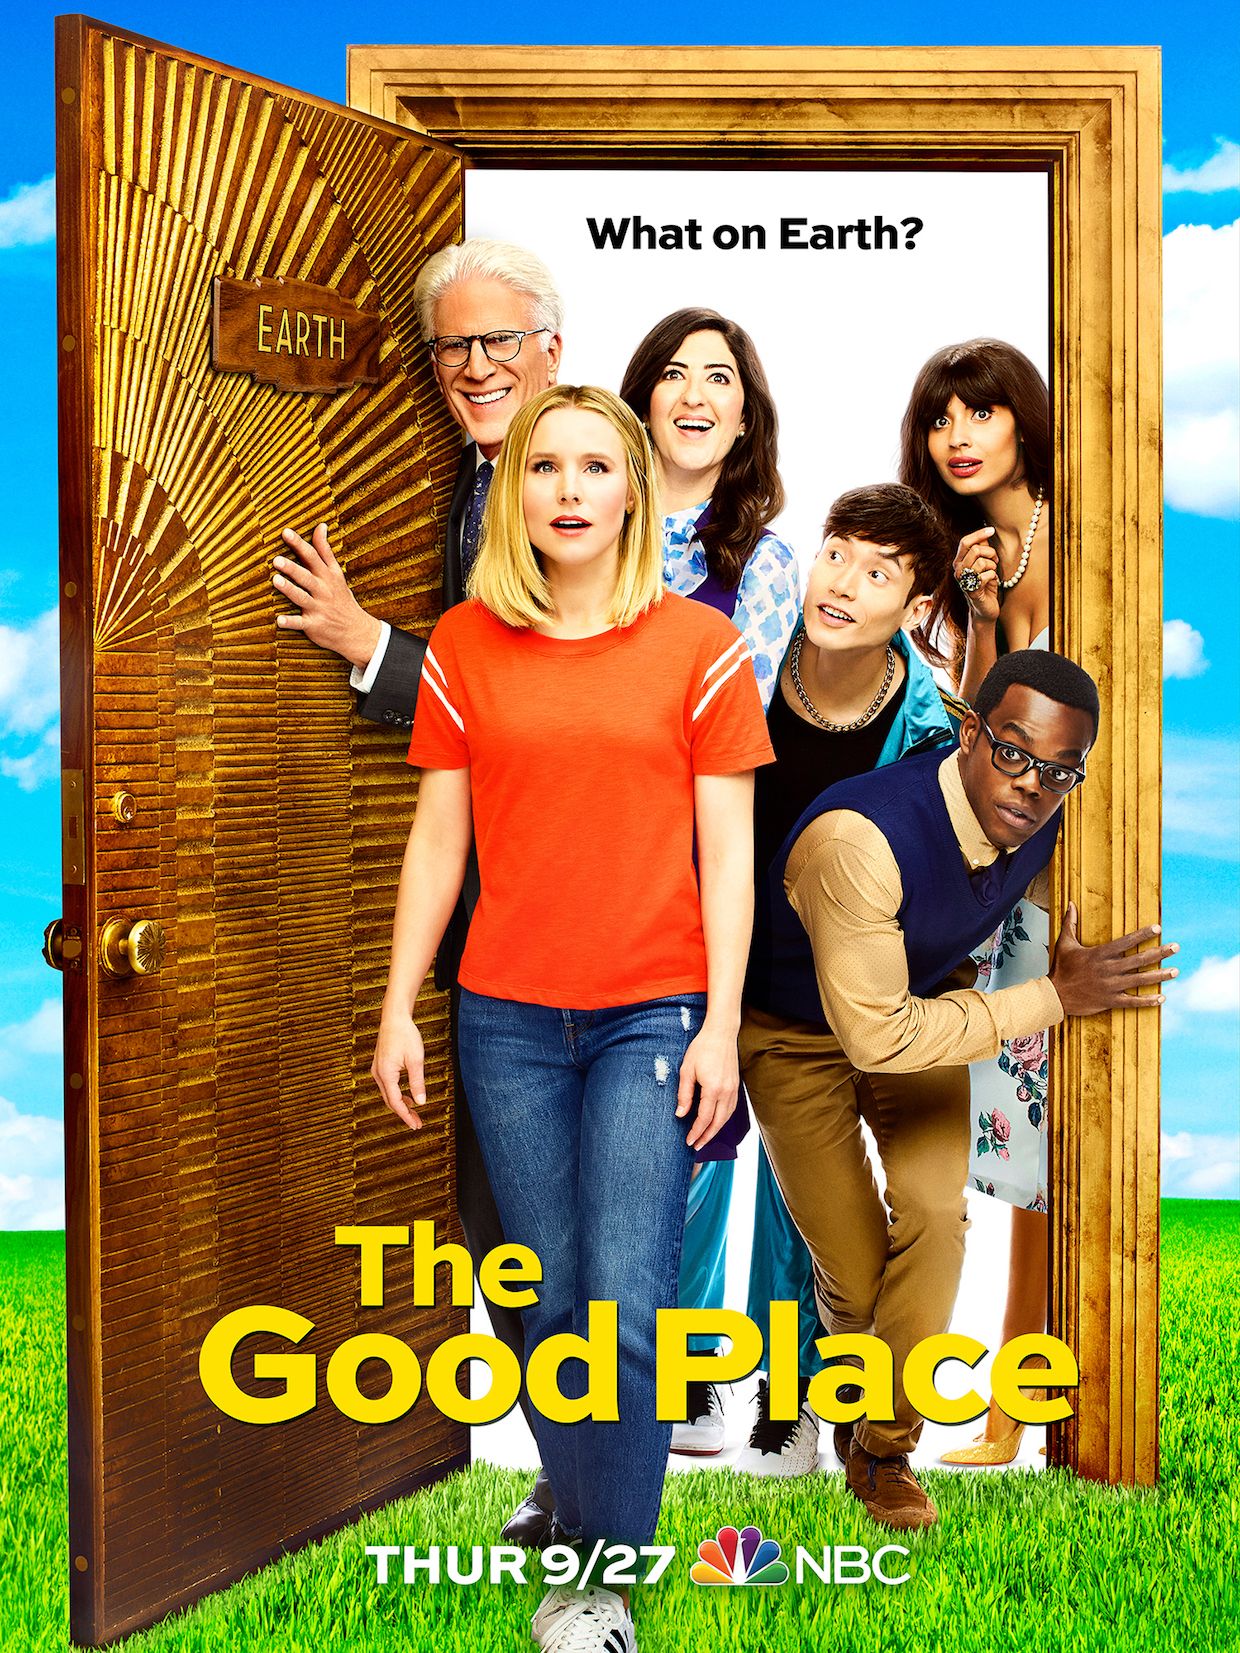 The Good Place Season 3 Poster